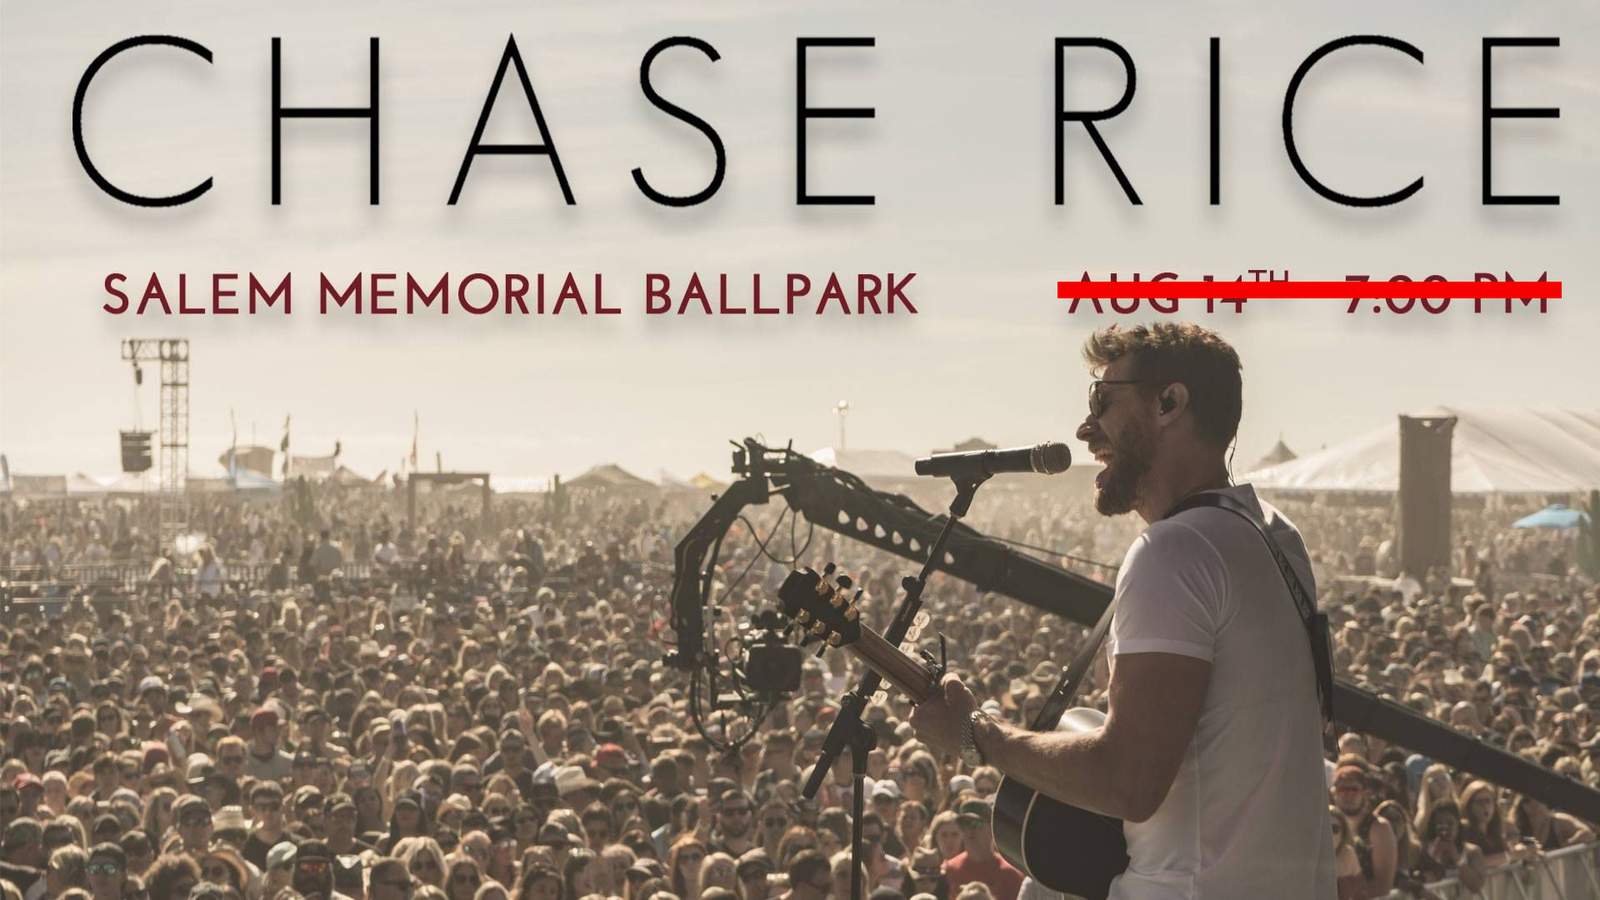 Salems Chase Rice concert pushed back more than 9 months